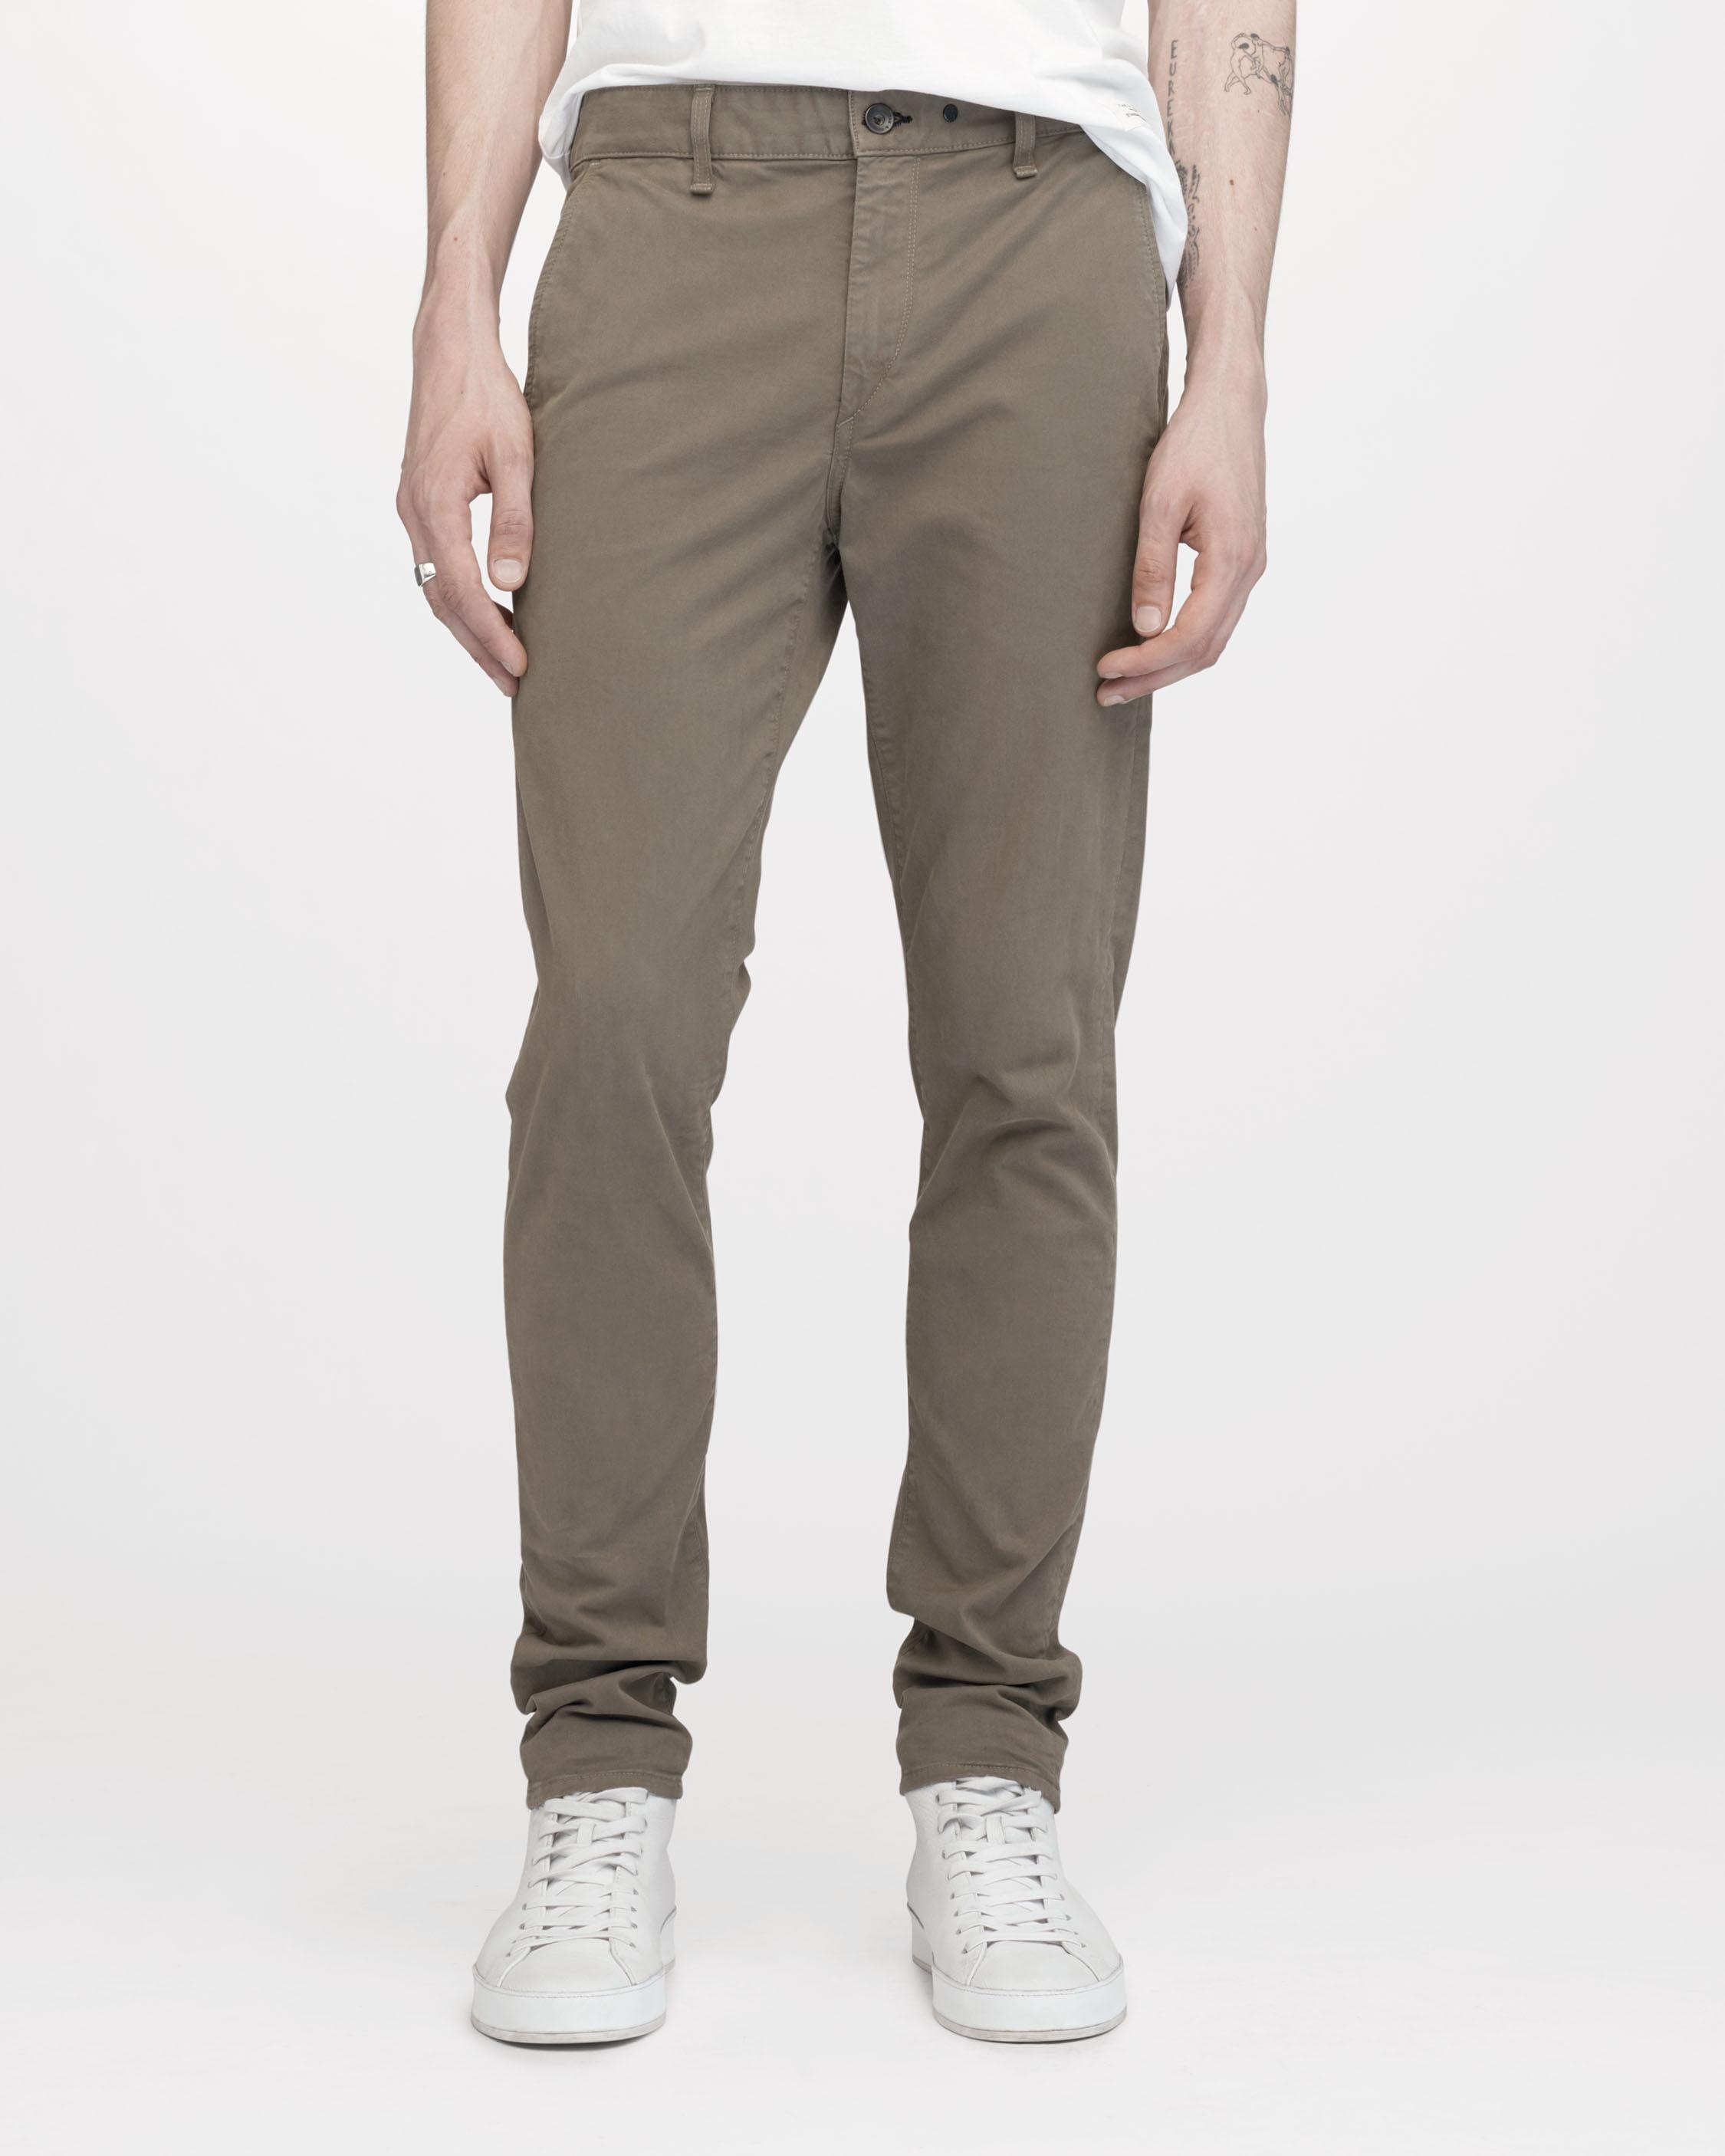 Fit 1 Low-Rise Chino
Extra Slim Fit Pant - 1